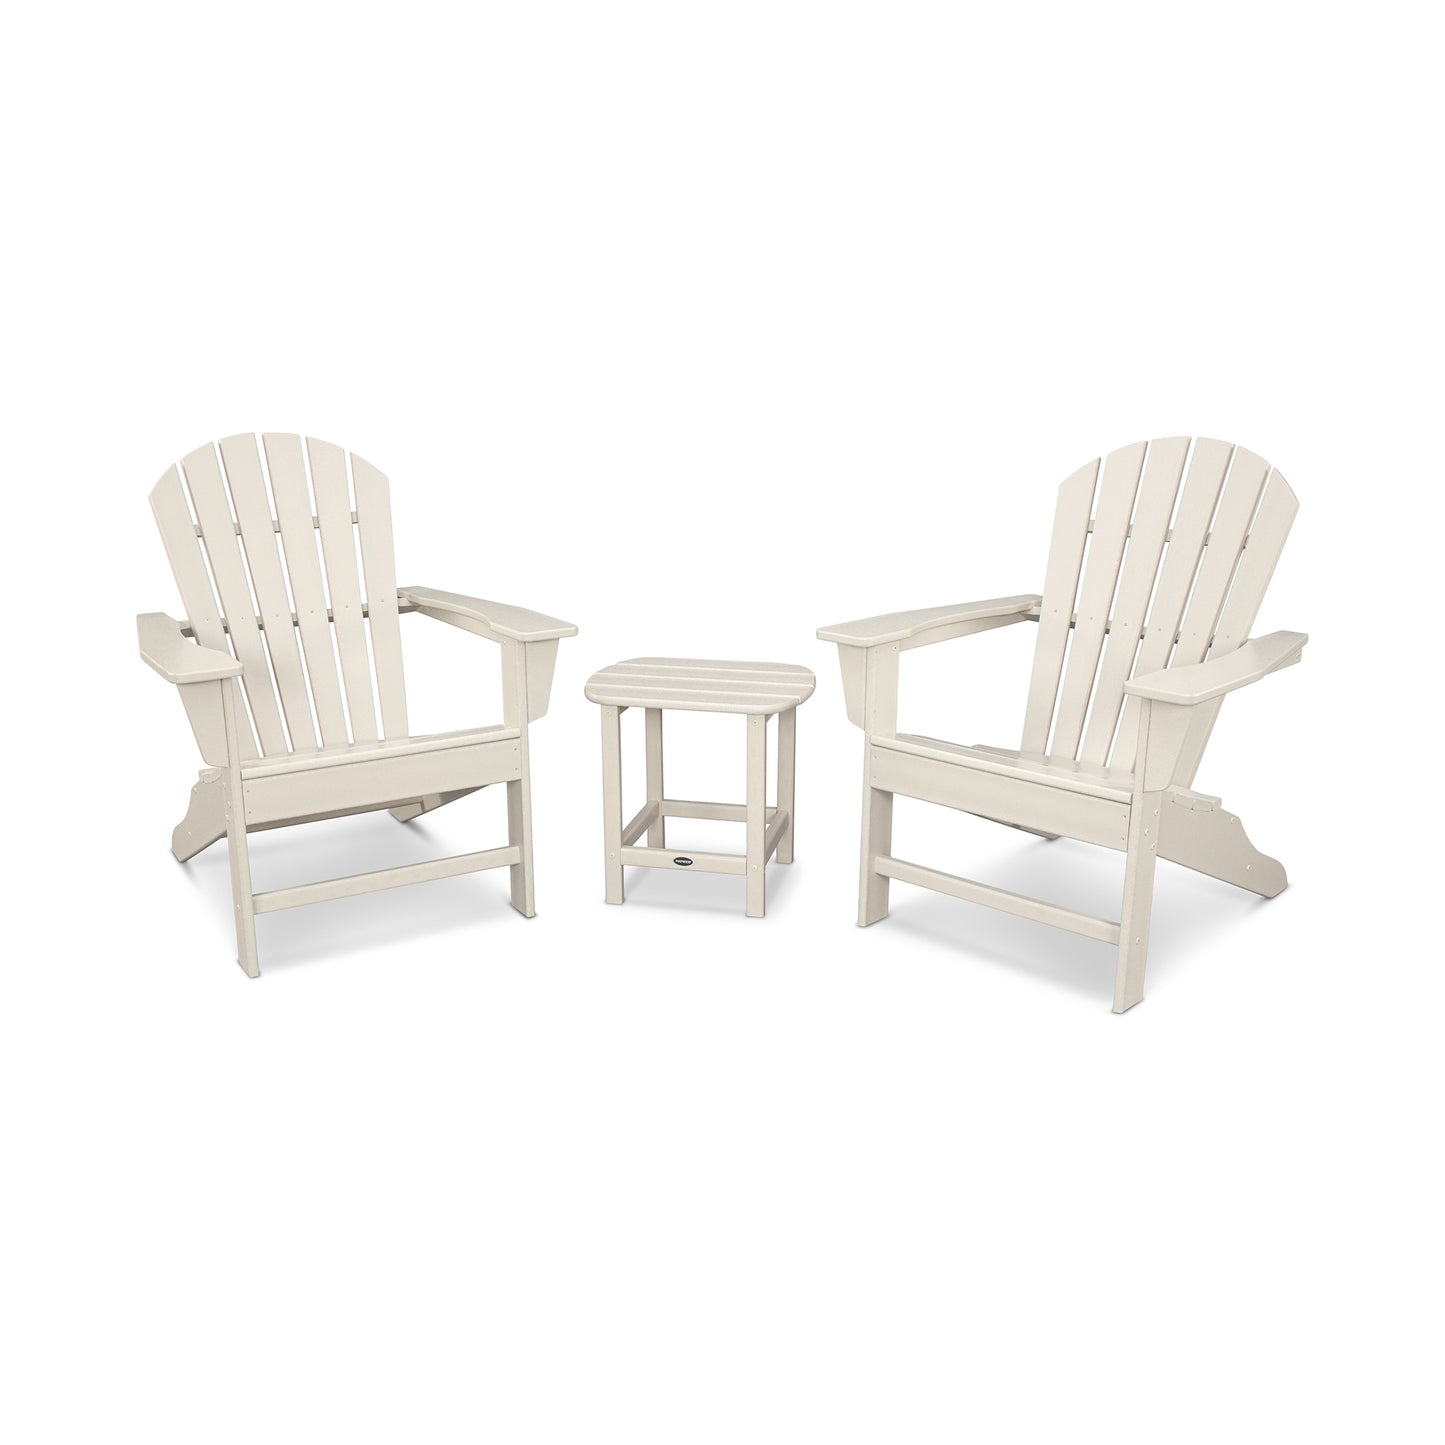 Two white POLYWOOD South Beach Adirondack chairs with a matching small round table isolated on a white background, arranged as if inviting a relaxing conversation.